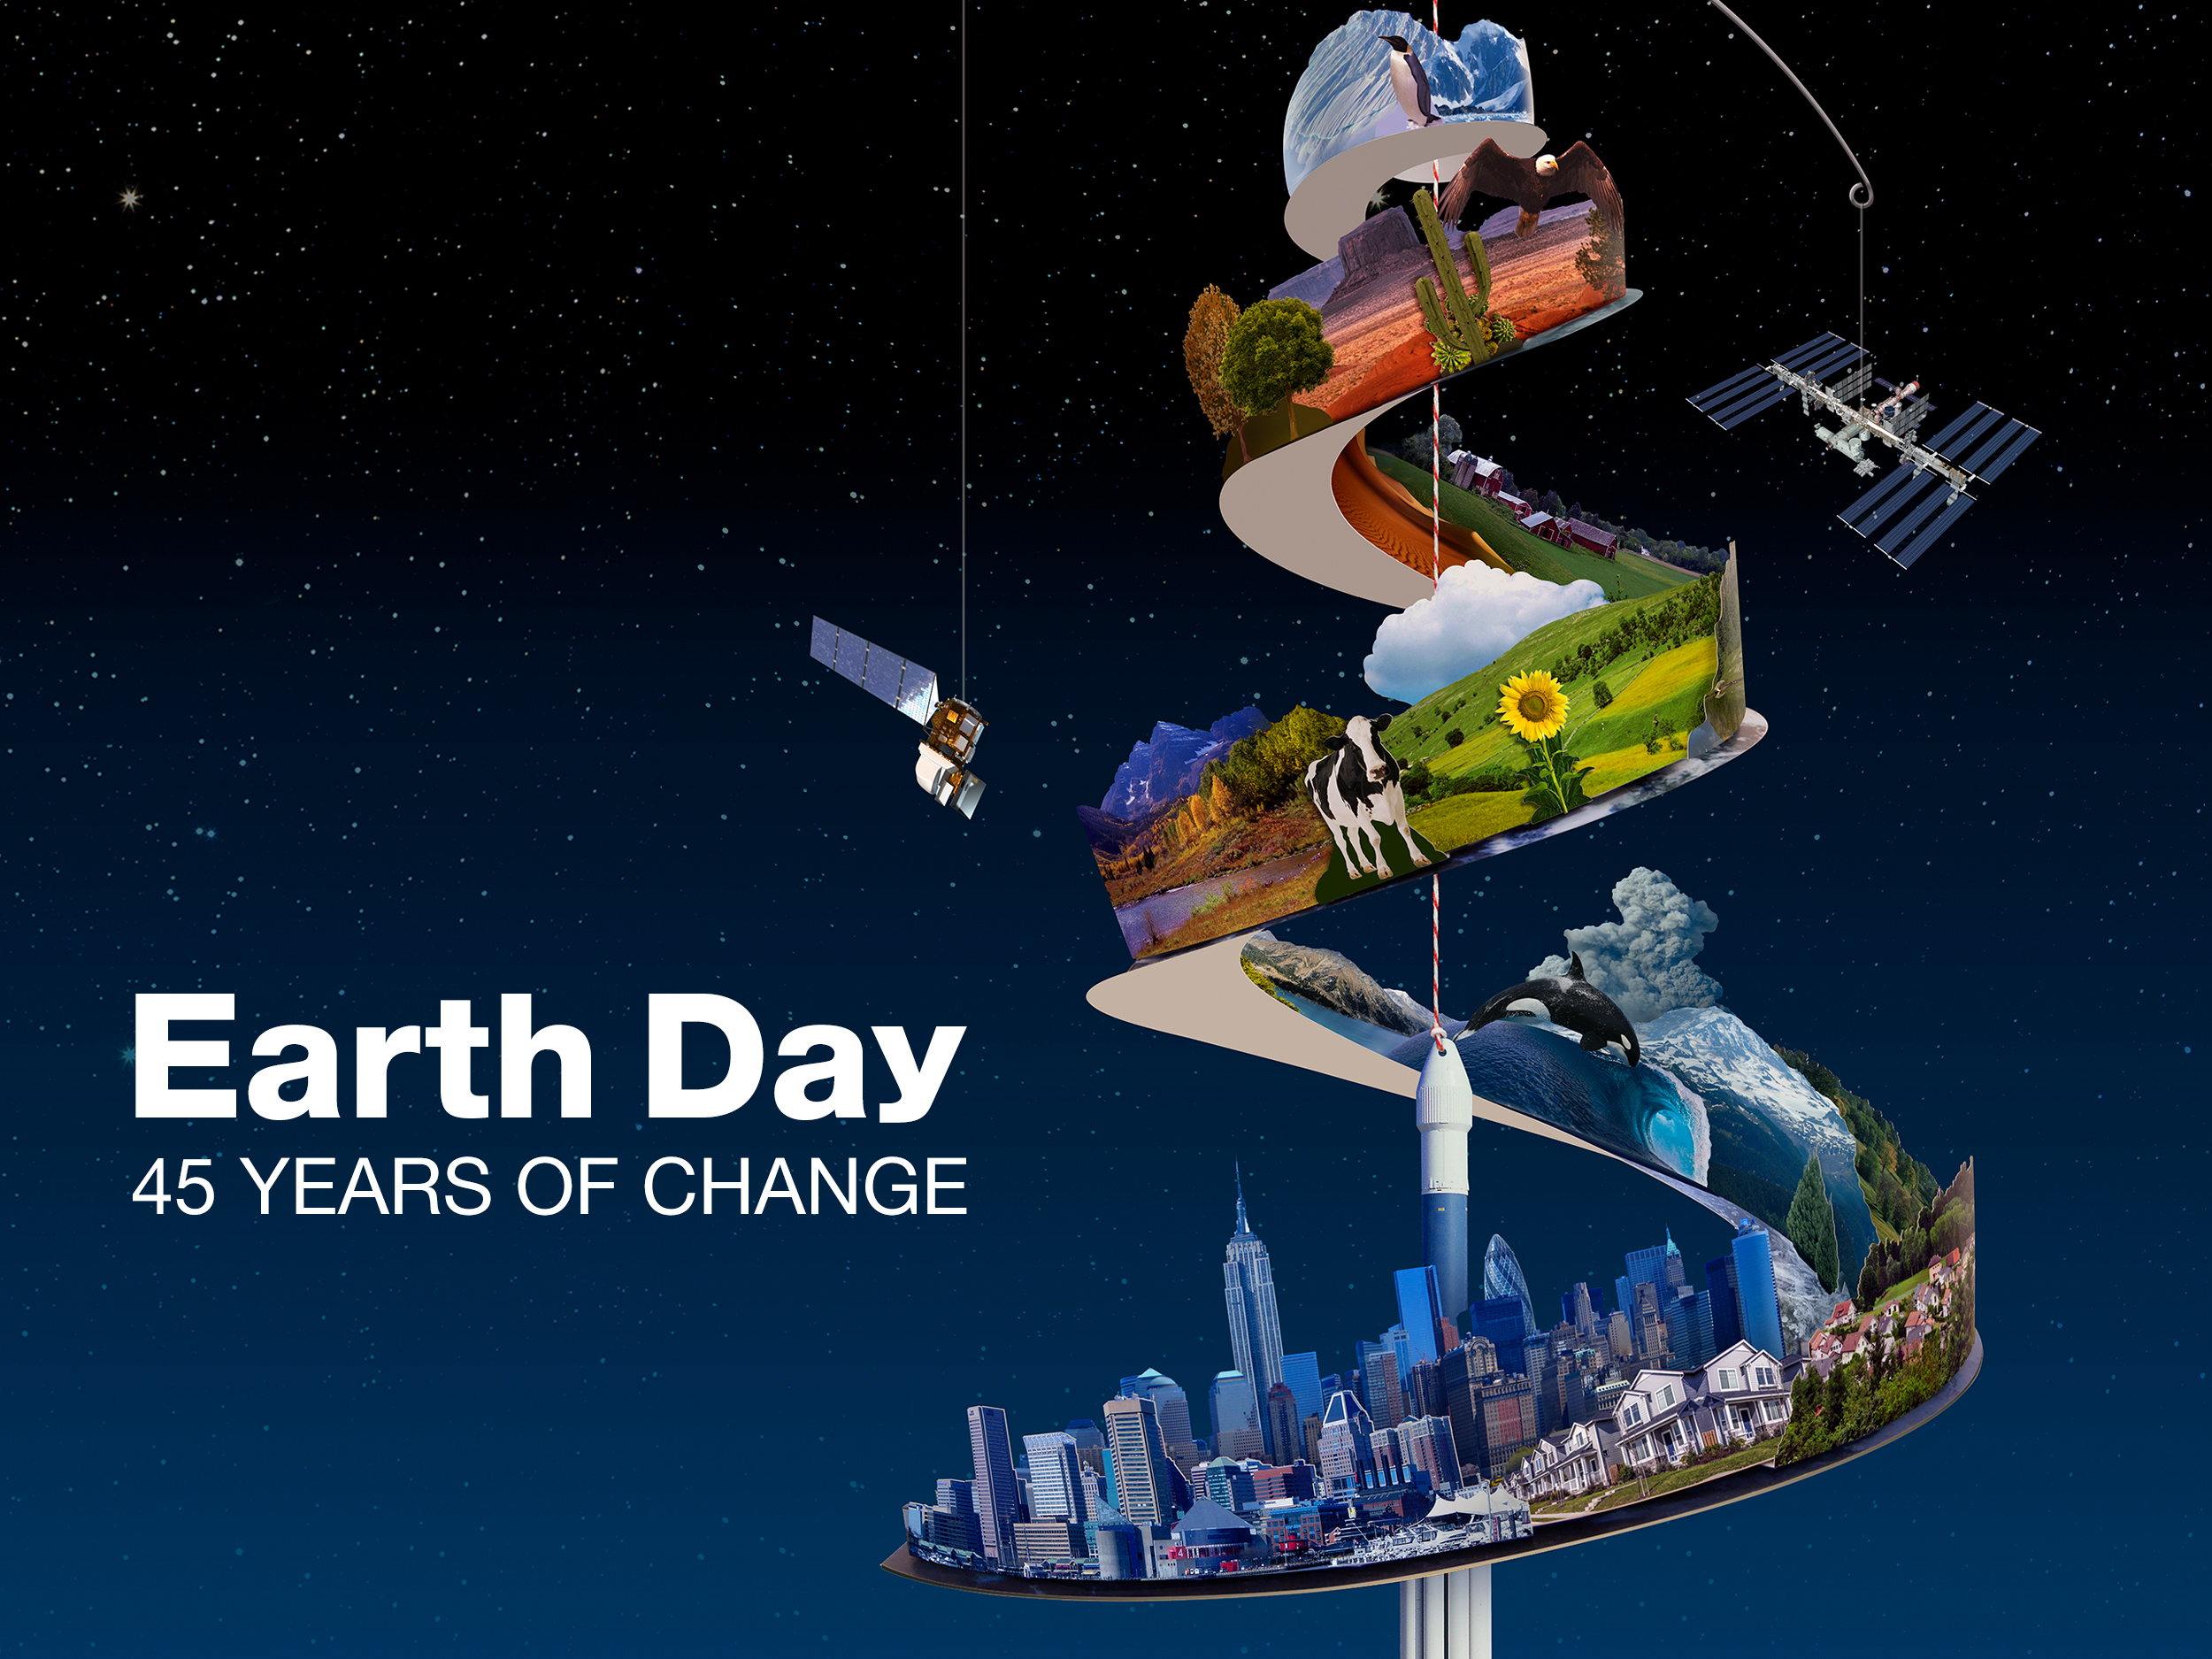 Earth Day 2015 poster